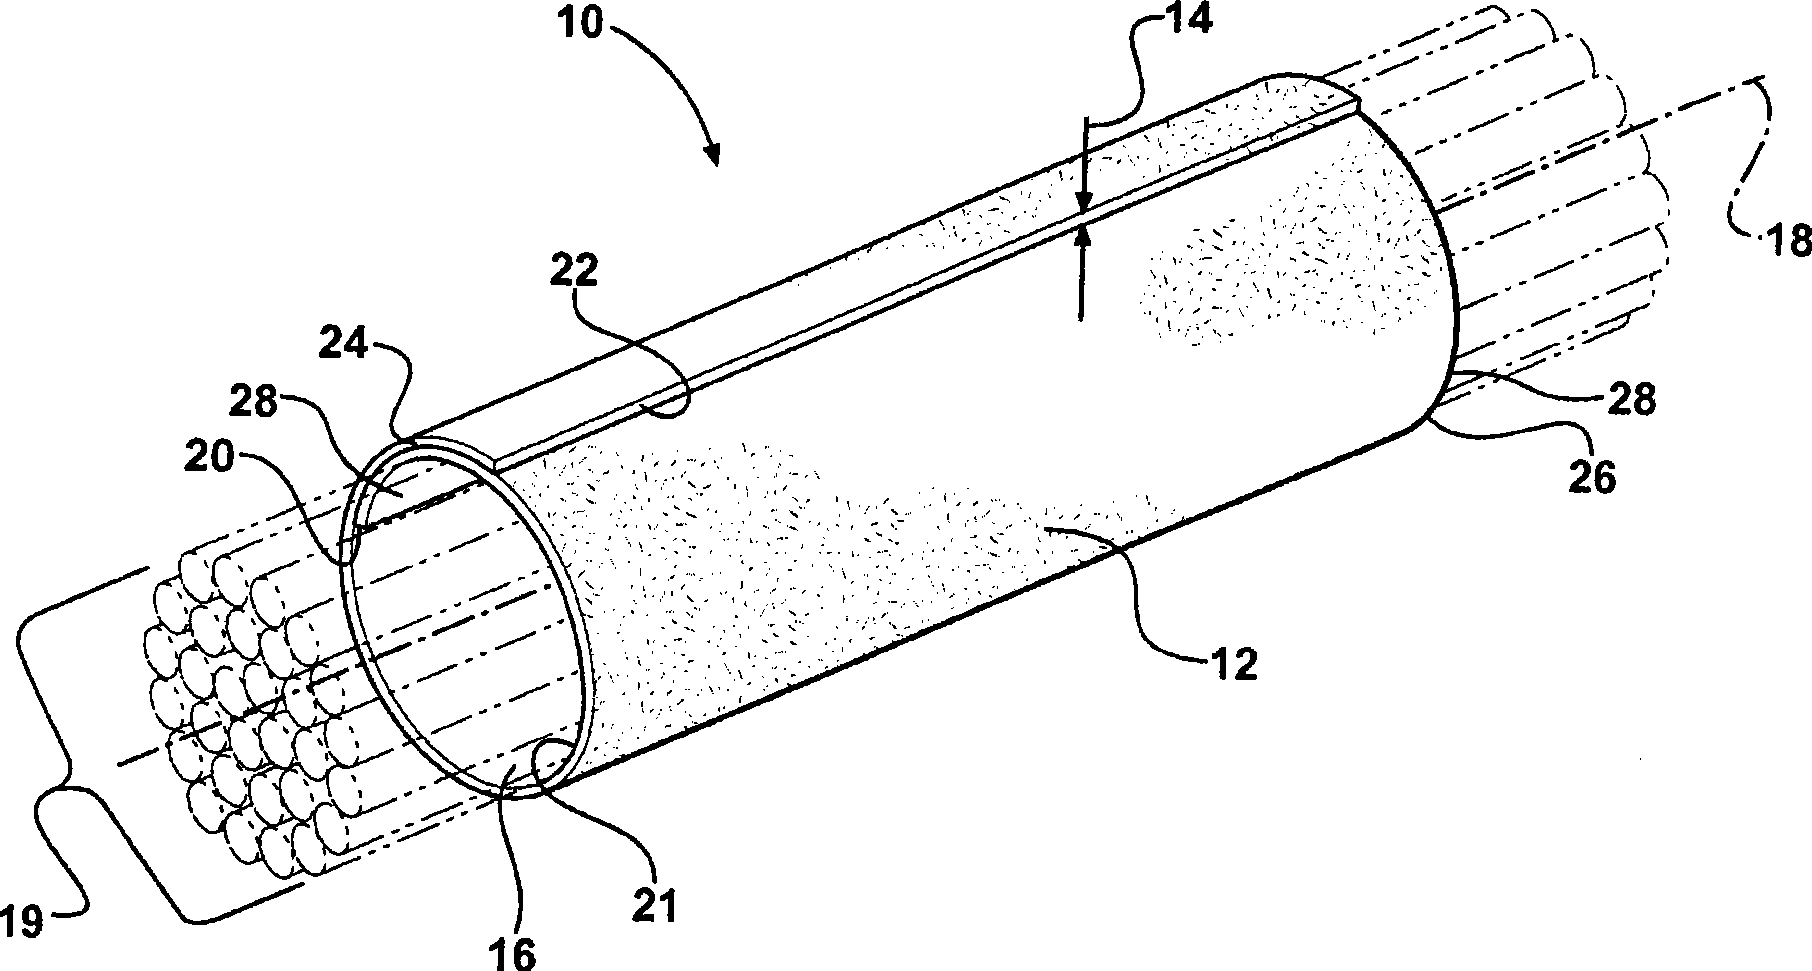 Non-woven self-wrapping acoustic sleeve and method of construction thereof